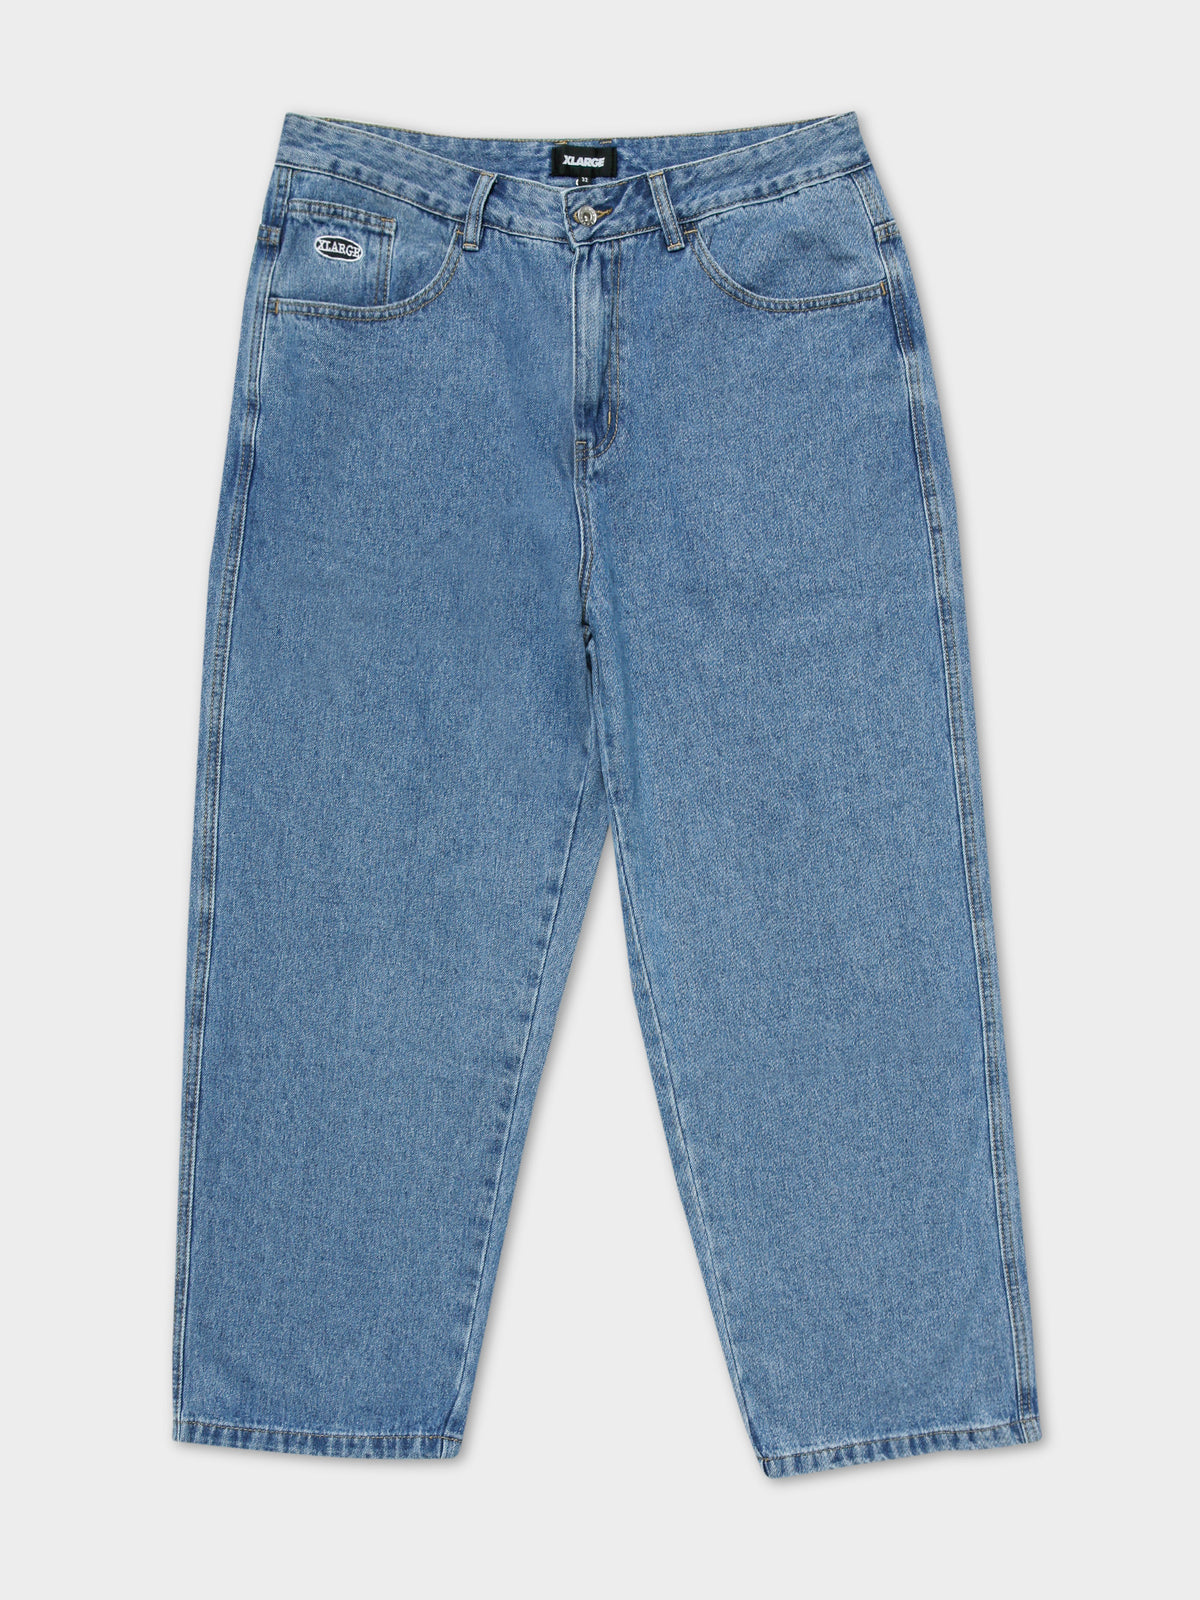 Bull 91 Jeans in Mid Blue